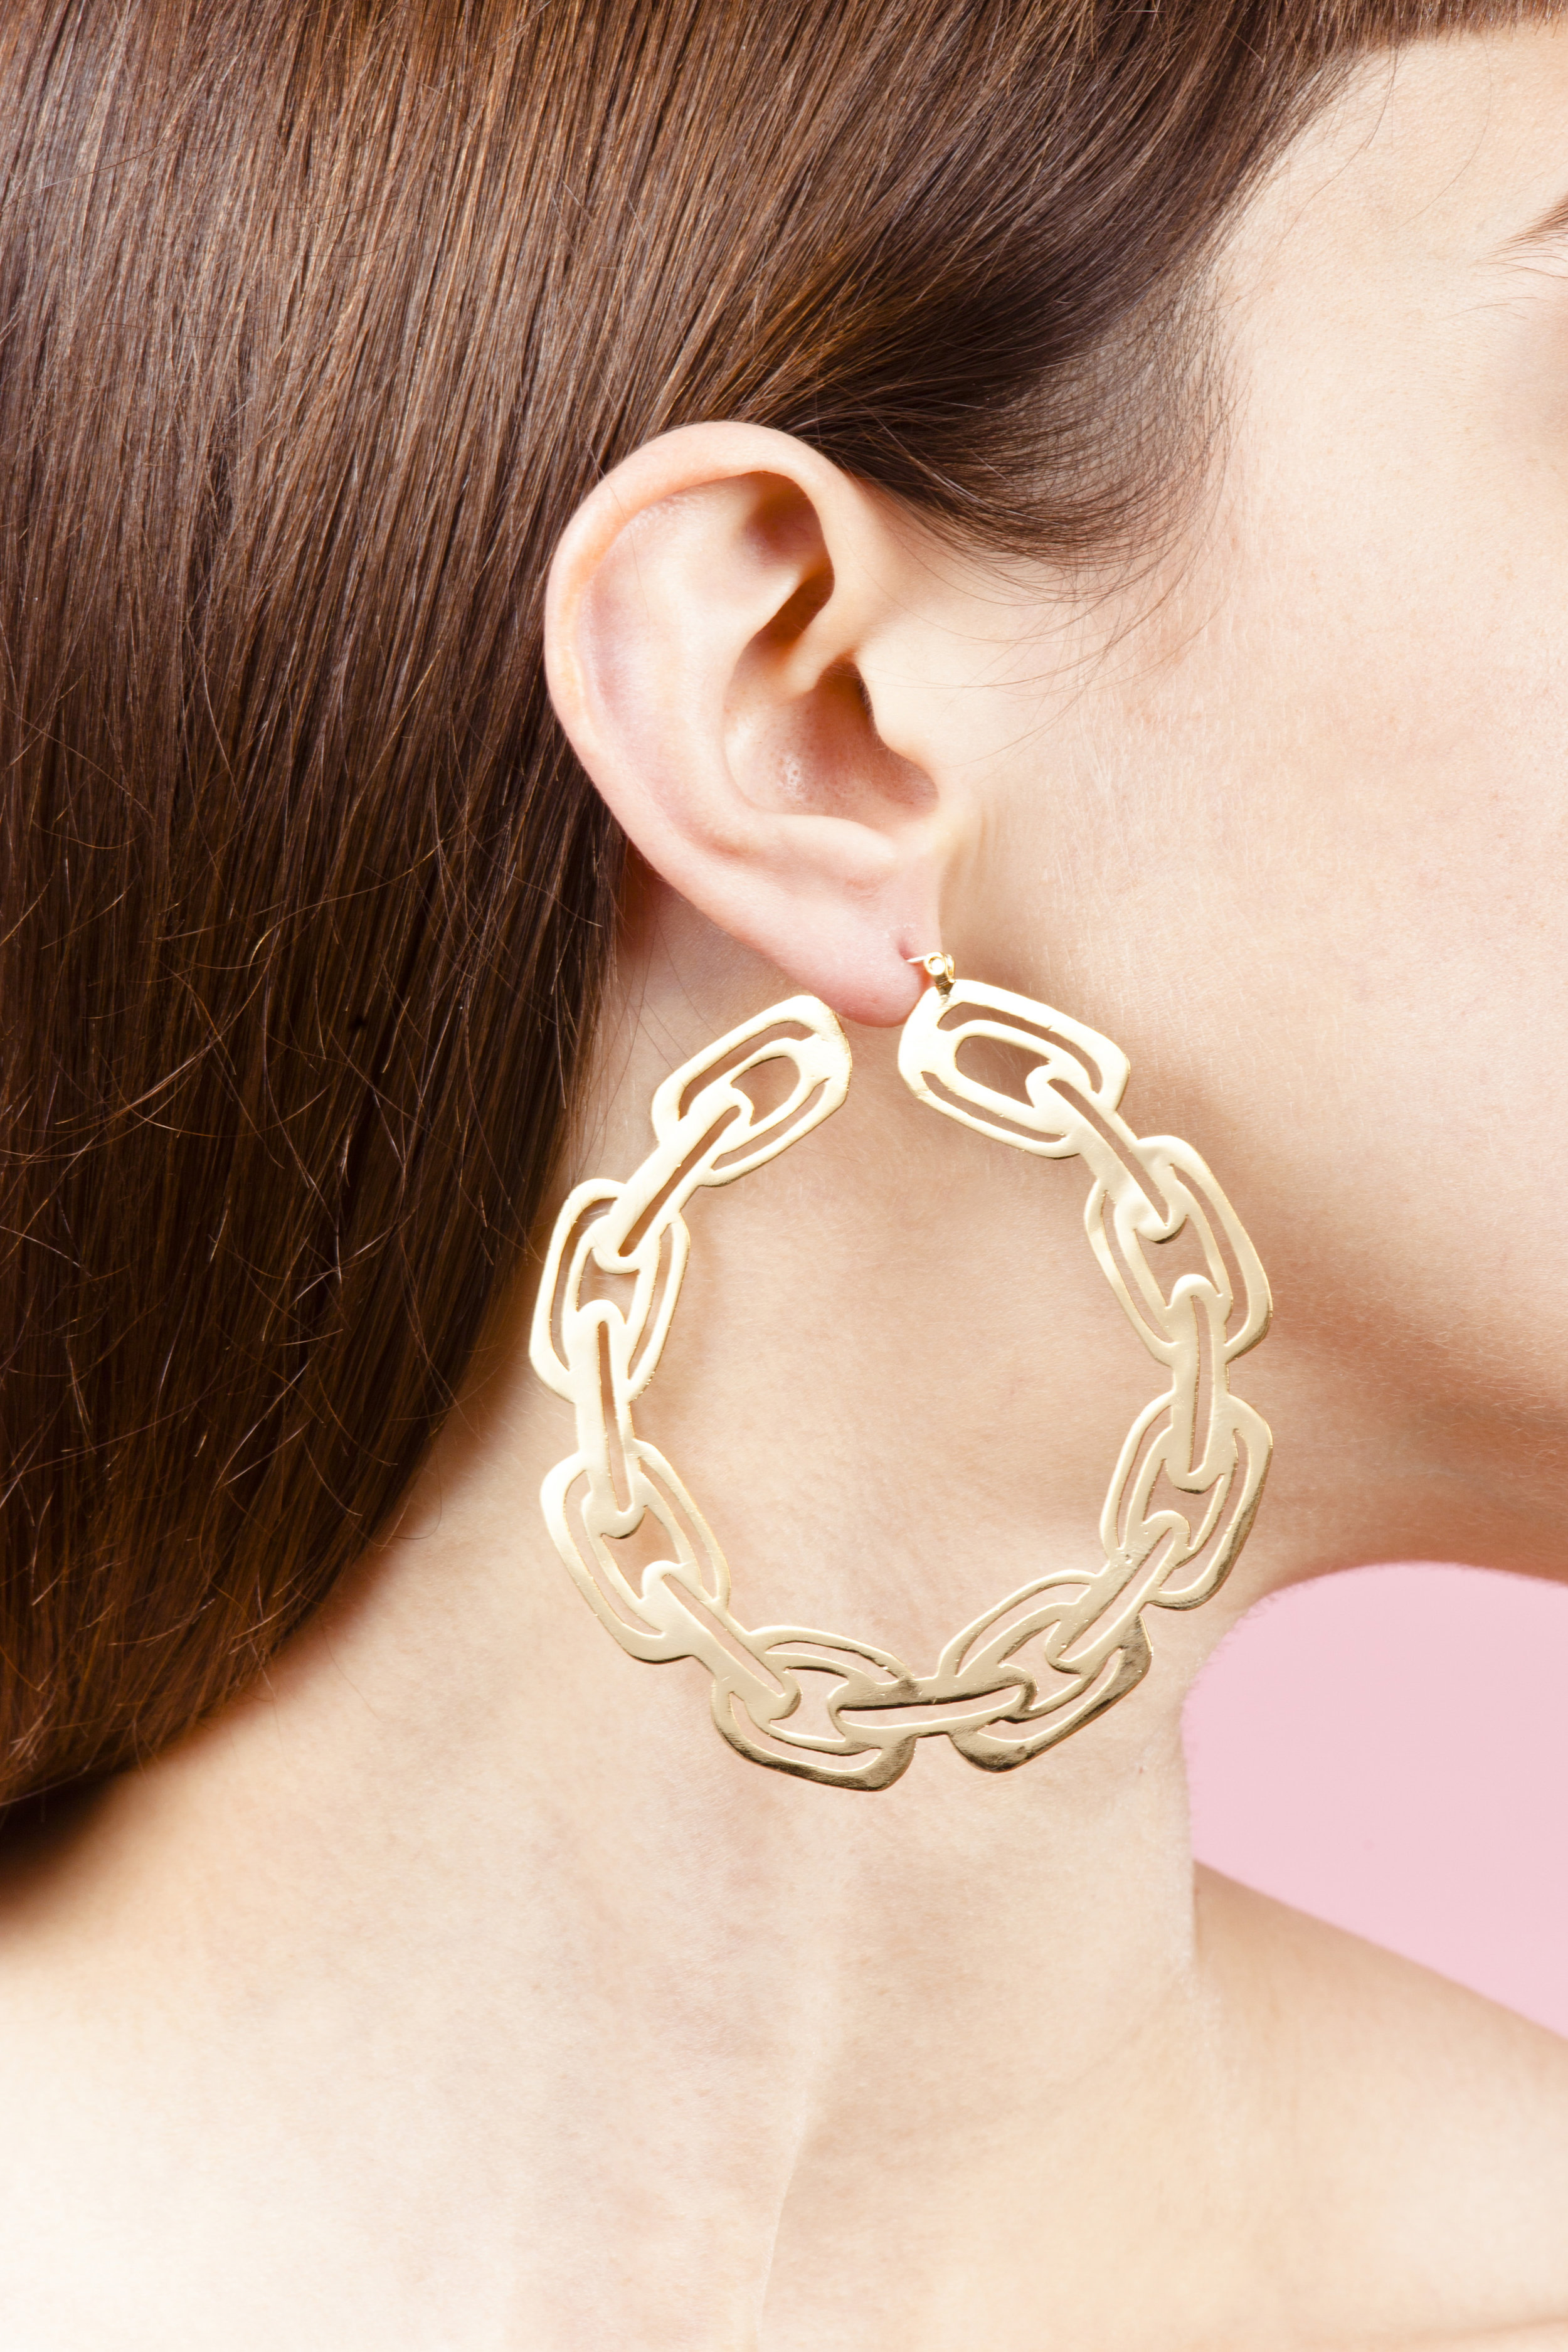   Gold Chain Hoops   Gold-Plated Brass, Sterling Silver  3”x3”x.25”    Photo by Harry Gould Harvey 